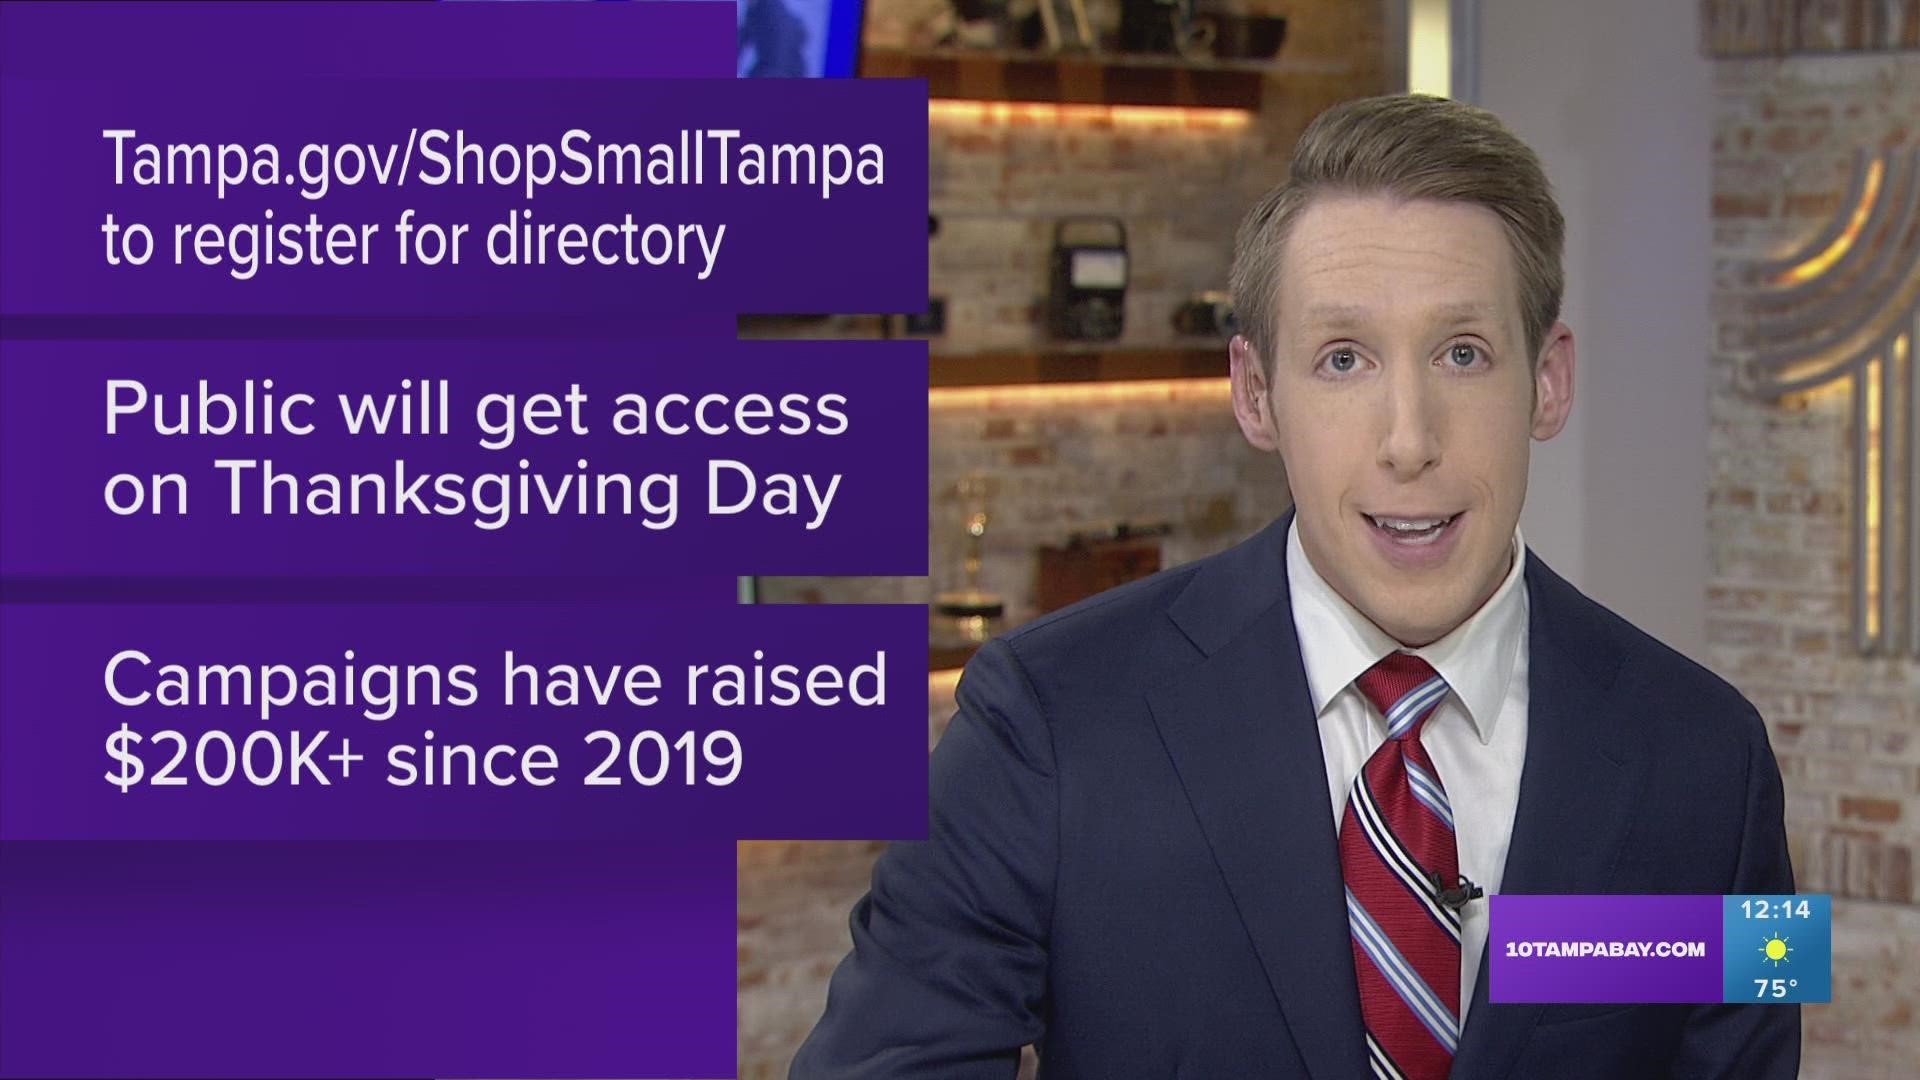 You can register for Tampa's small business directory at Tampa.gov/ShopSmallTampa.